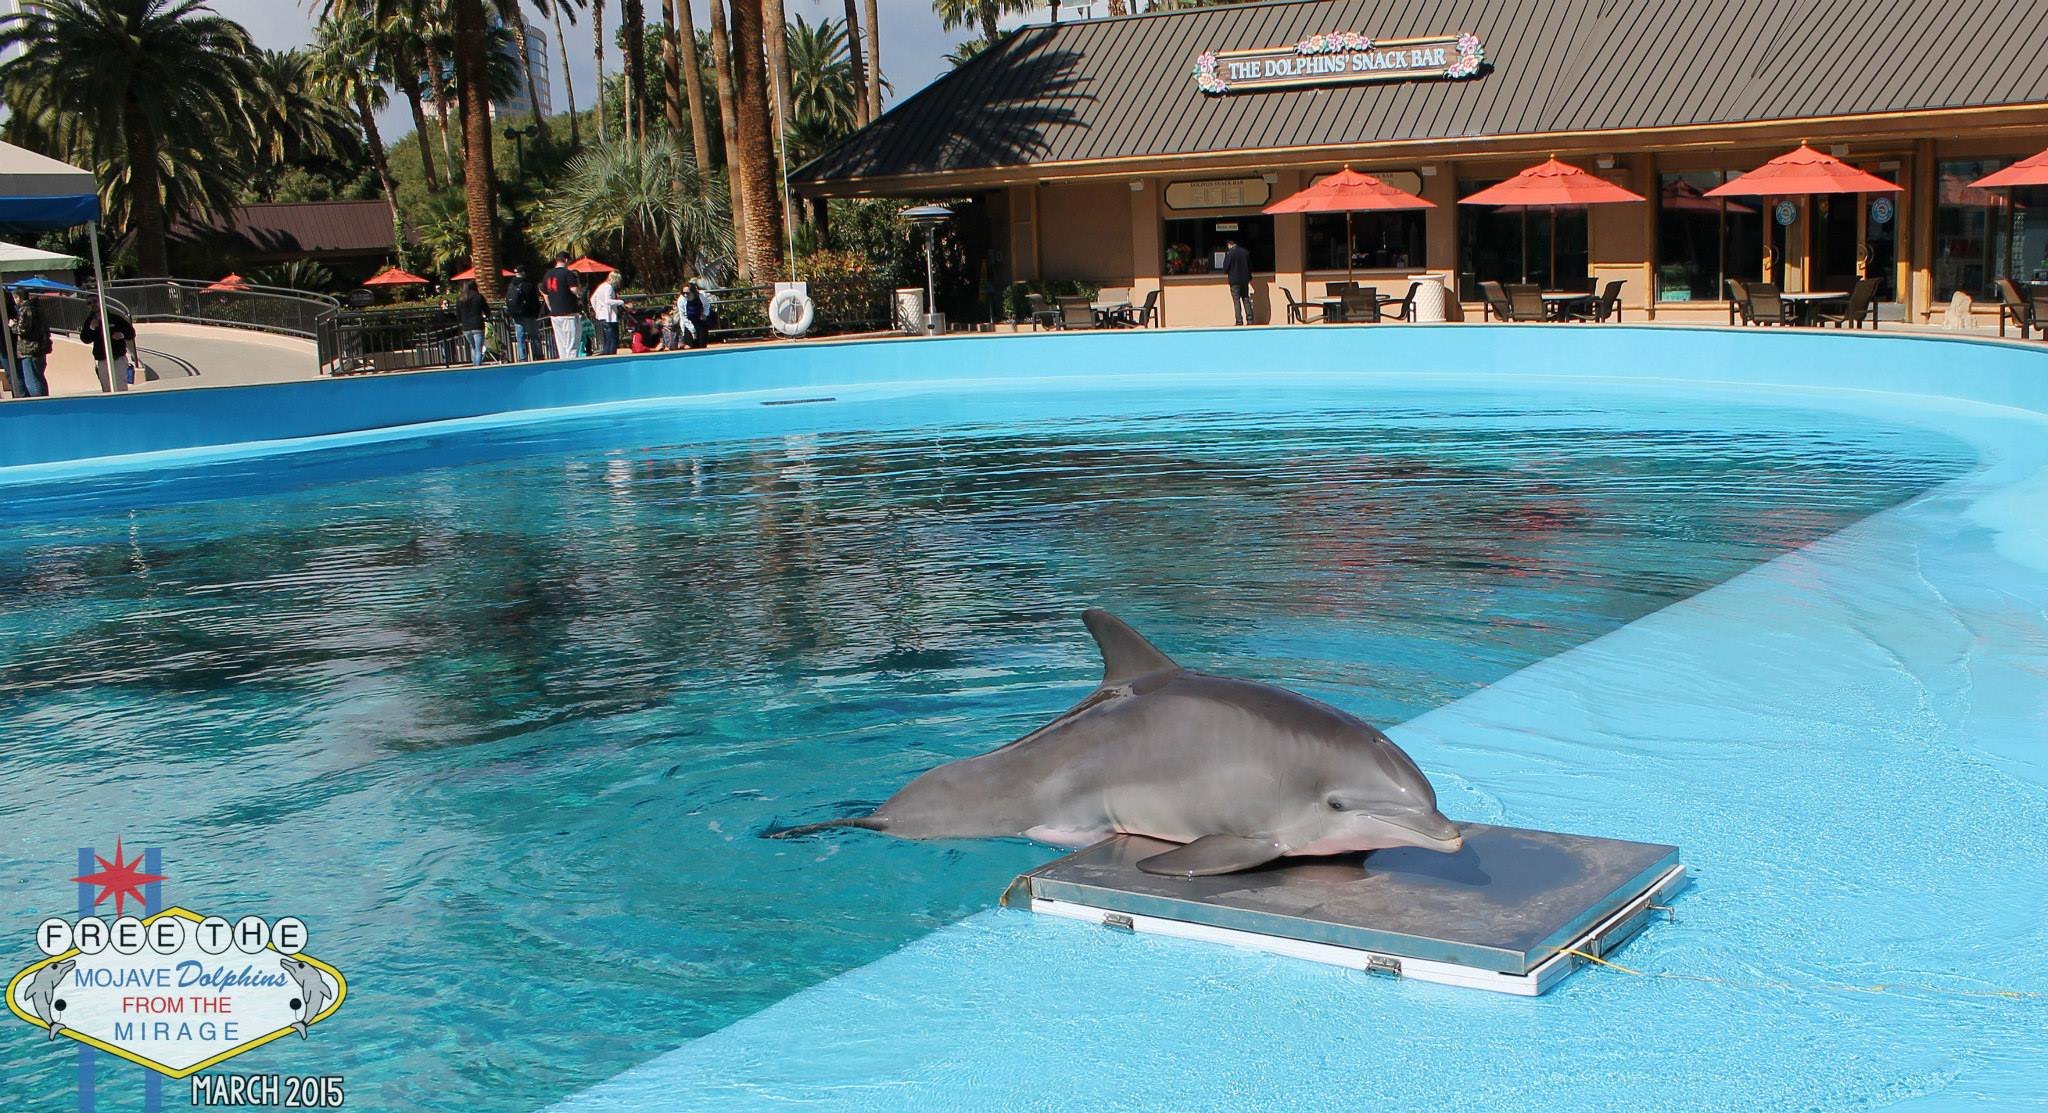 Former Mirage dolphin dies at Virgin Islands facility